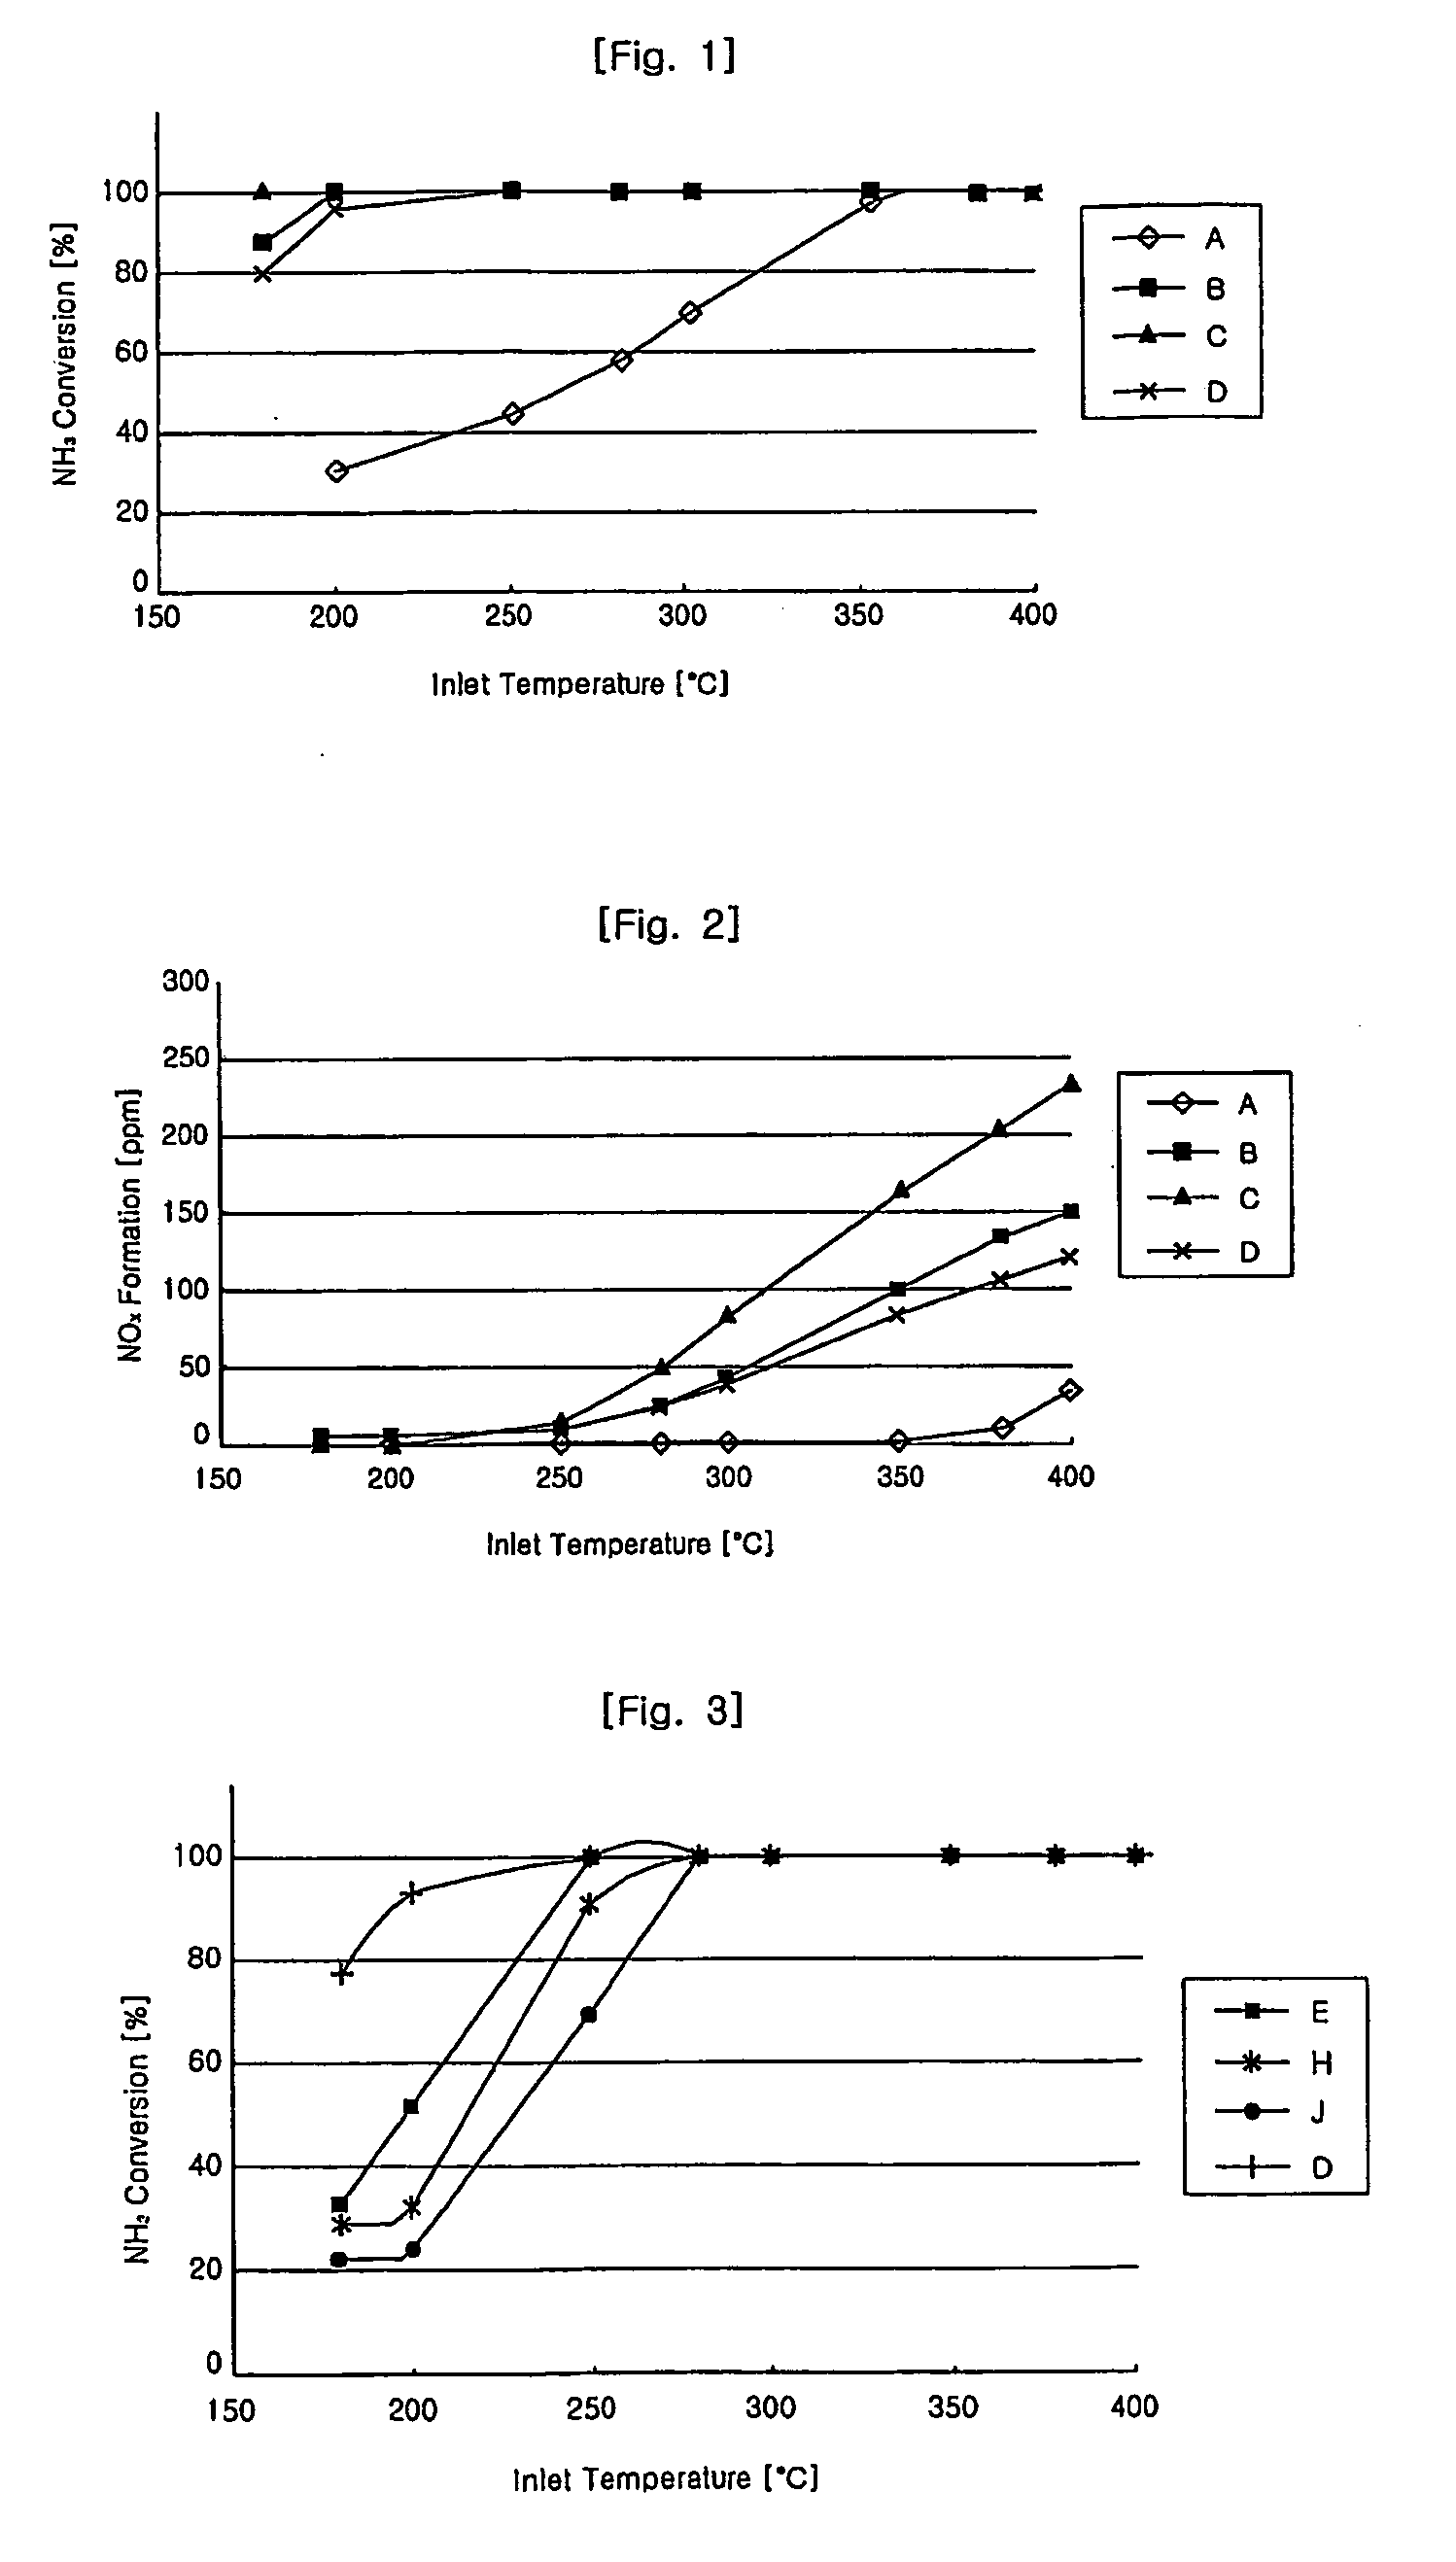 Oxidation Catalyst for NH3 and an Apparatus for Treating Slipped or Scripped NH3